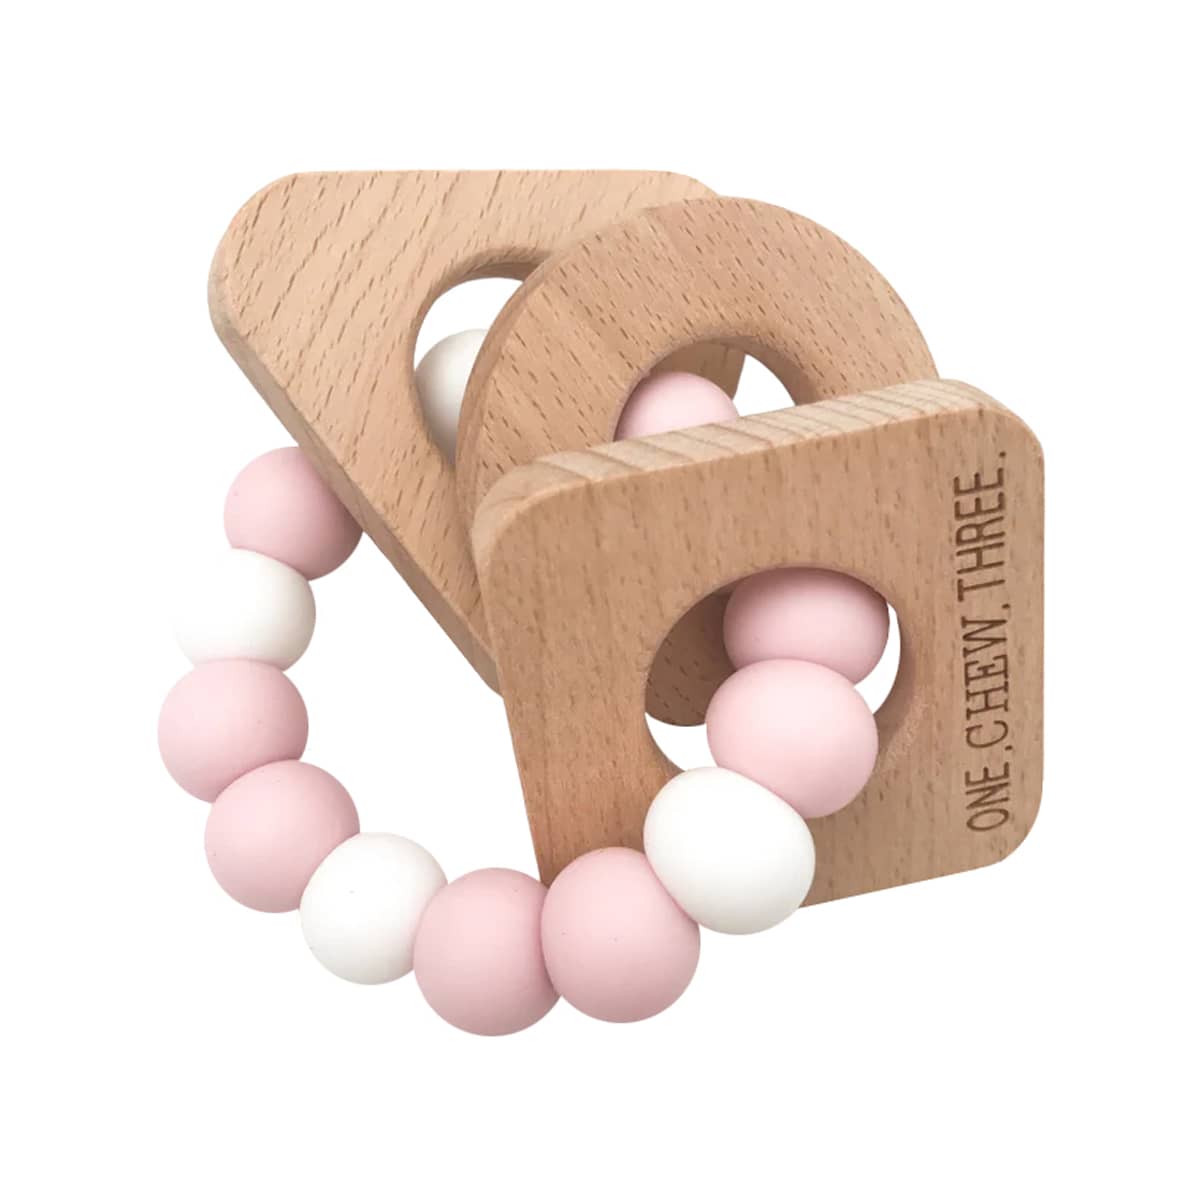 One.Chew.Three Shapes Silicone and Beech Wood Teether - Pink